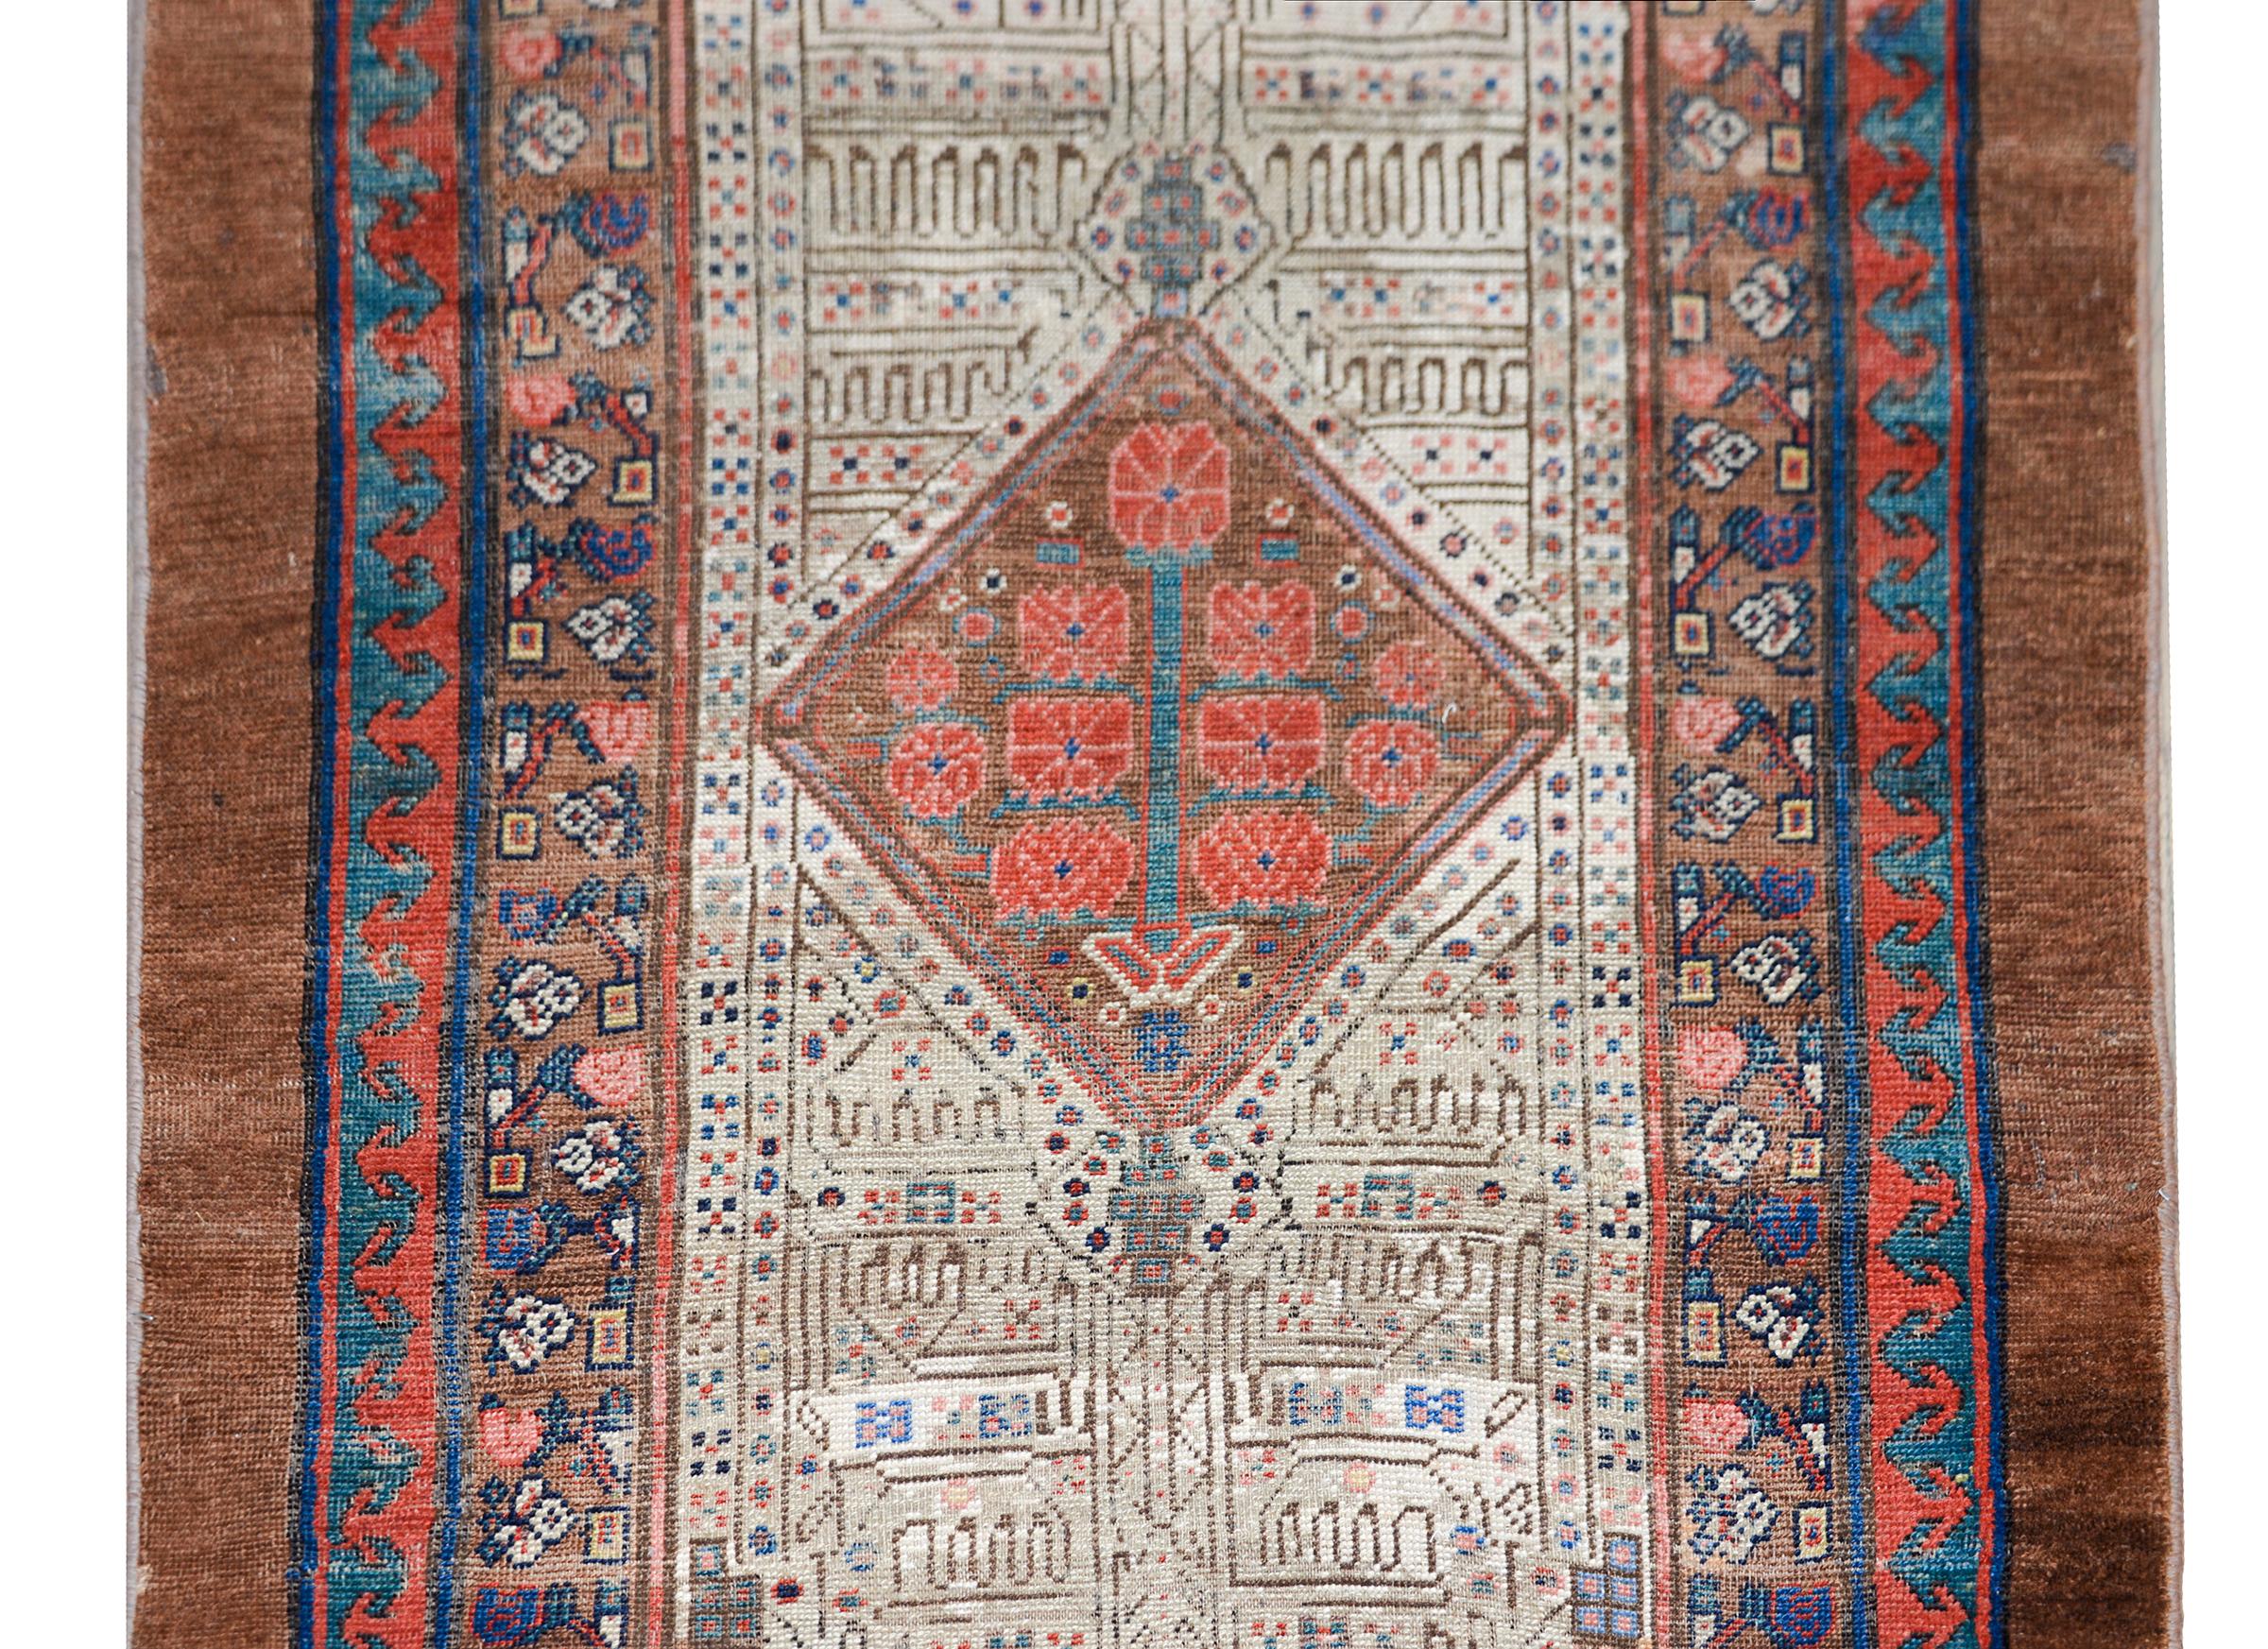 An incredible early 20th century Persian Serab runner with the most wonderful stylized floral patterned field with three large diamond medallions, all woven in crimson, indigo, white, and natural camel hair wool, and surrounded by several petite